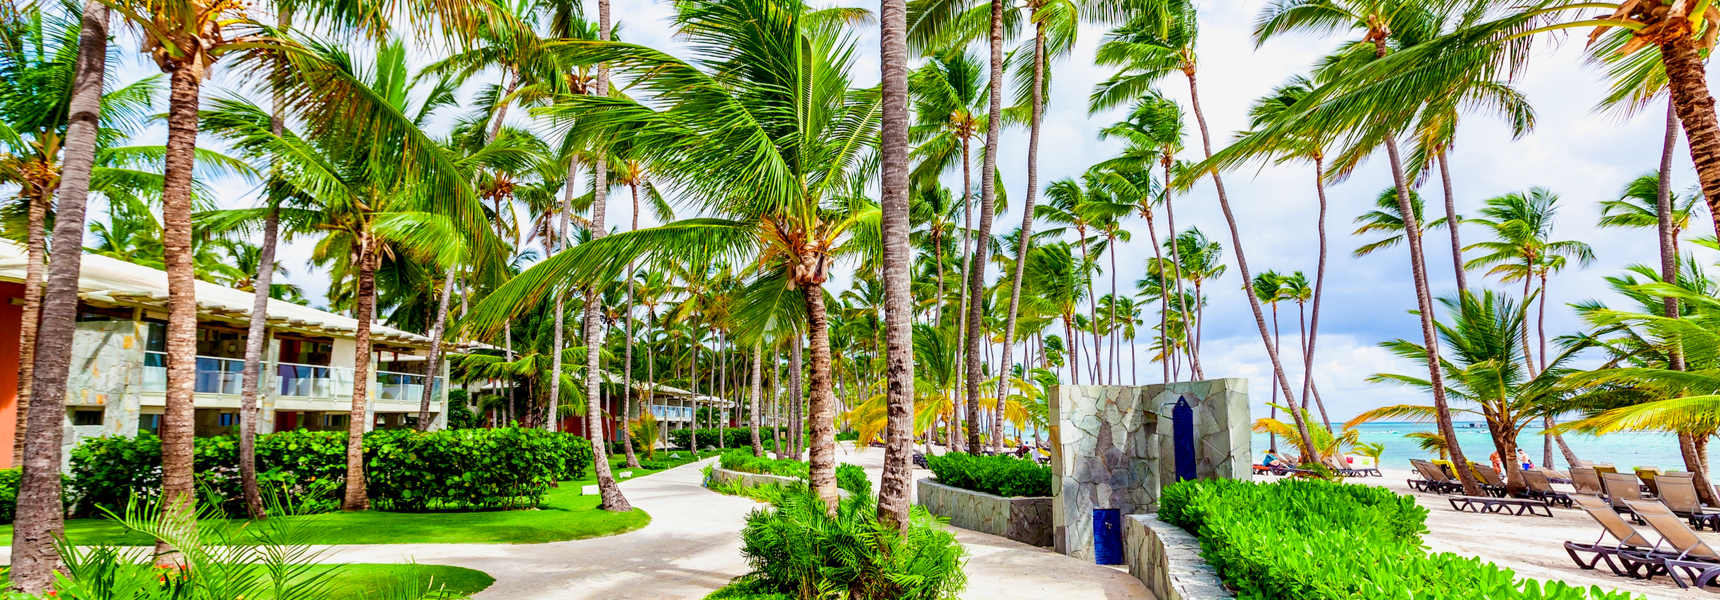 8 Theme Landscaping Ideas Youll Love - February 2022